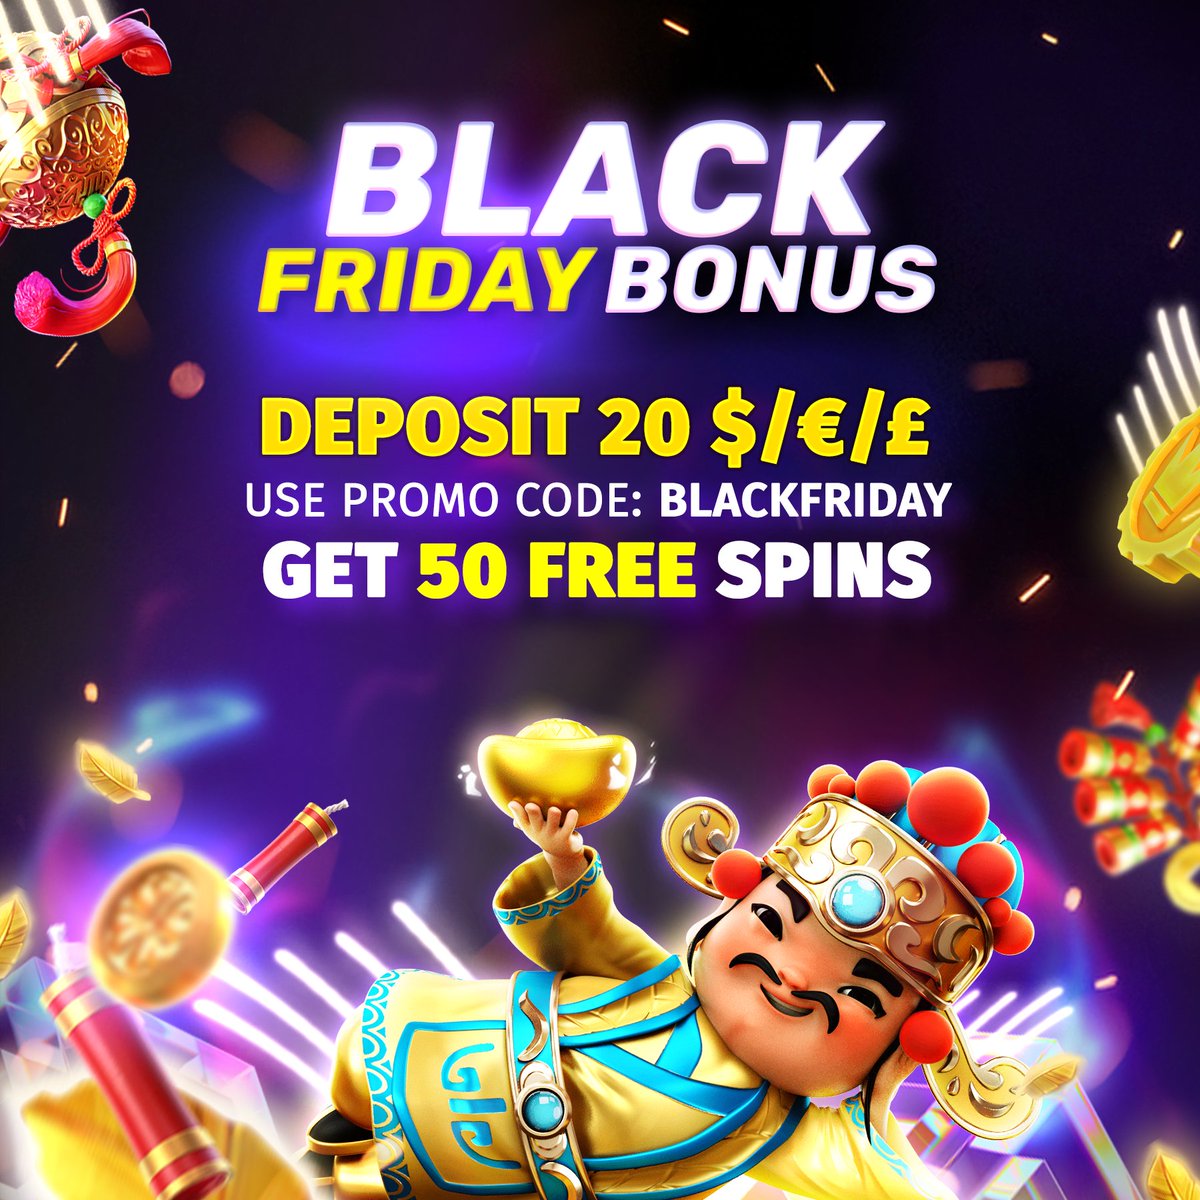 &#128680;BLACK FRIDAY on MyStake !! Get 50 FreeSpins !! 

From Friday 00:00 (GMT+2) to Sunday 23:59 (GMT+2) 

&#128165;Deposit 20 $/€/&#163; and activate bonus 1 hour later

Promo Code: BLACKFRIDAY 

❌No Wager
❌No with other active bonus
❌Use code only once